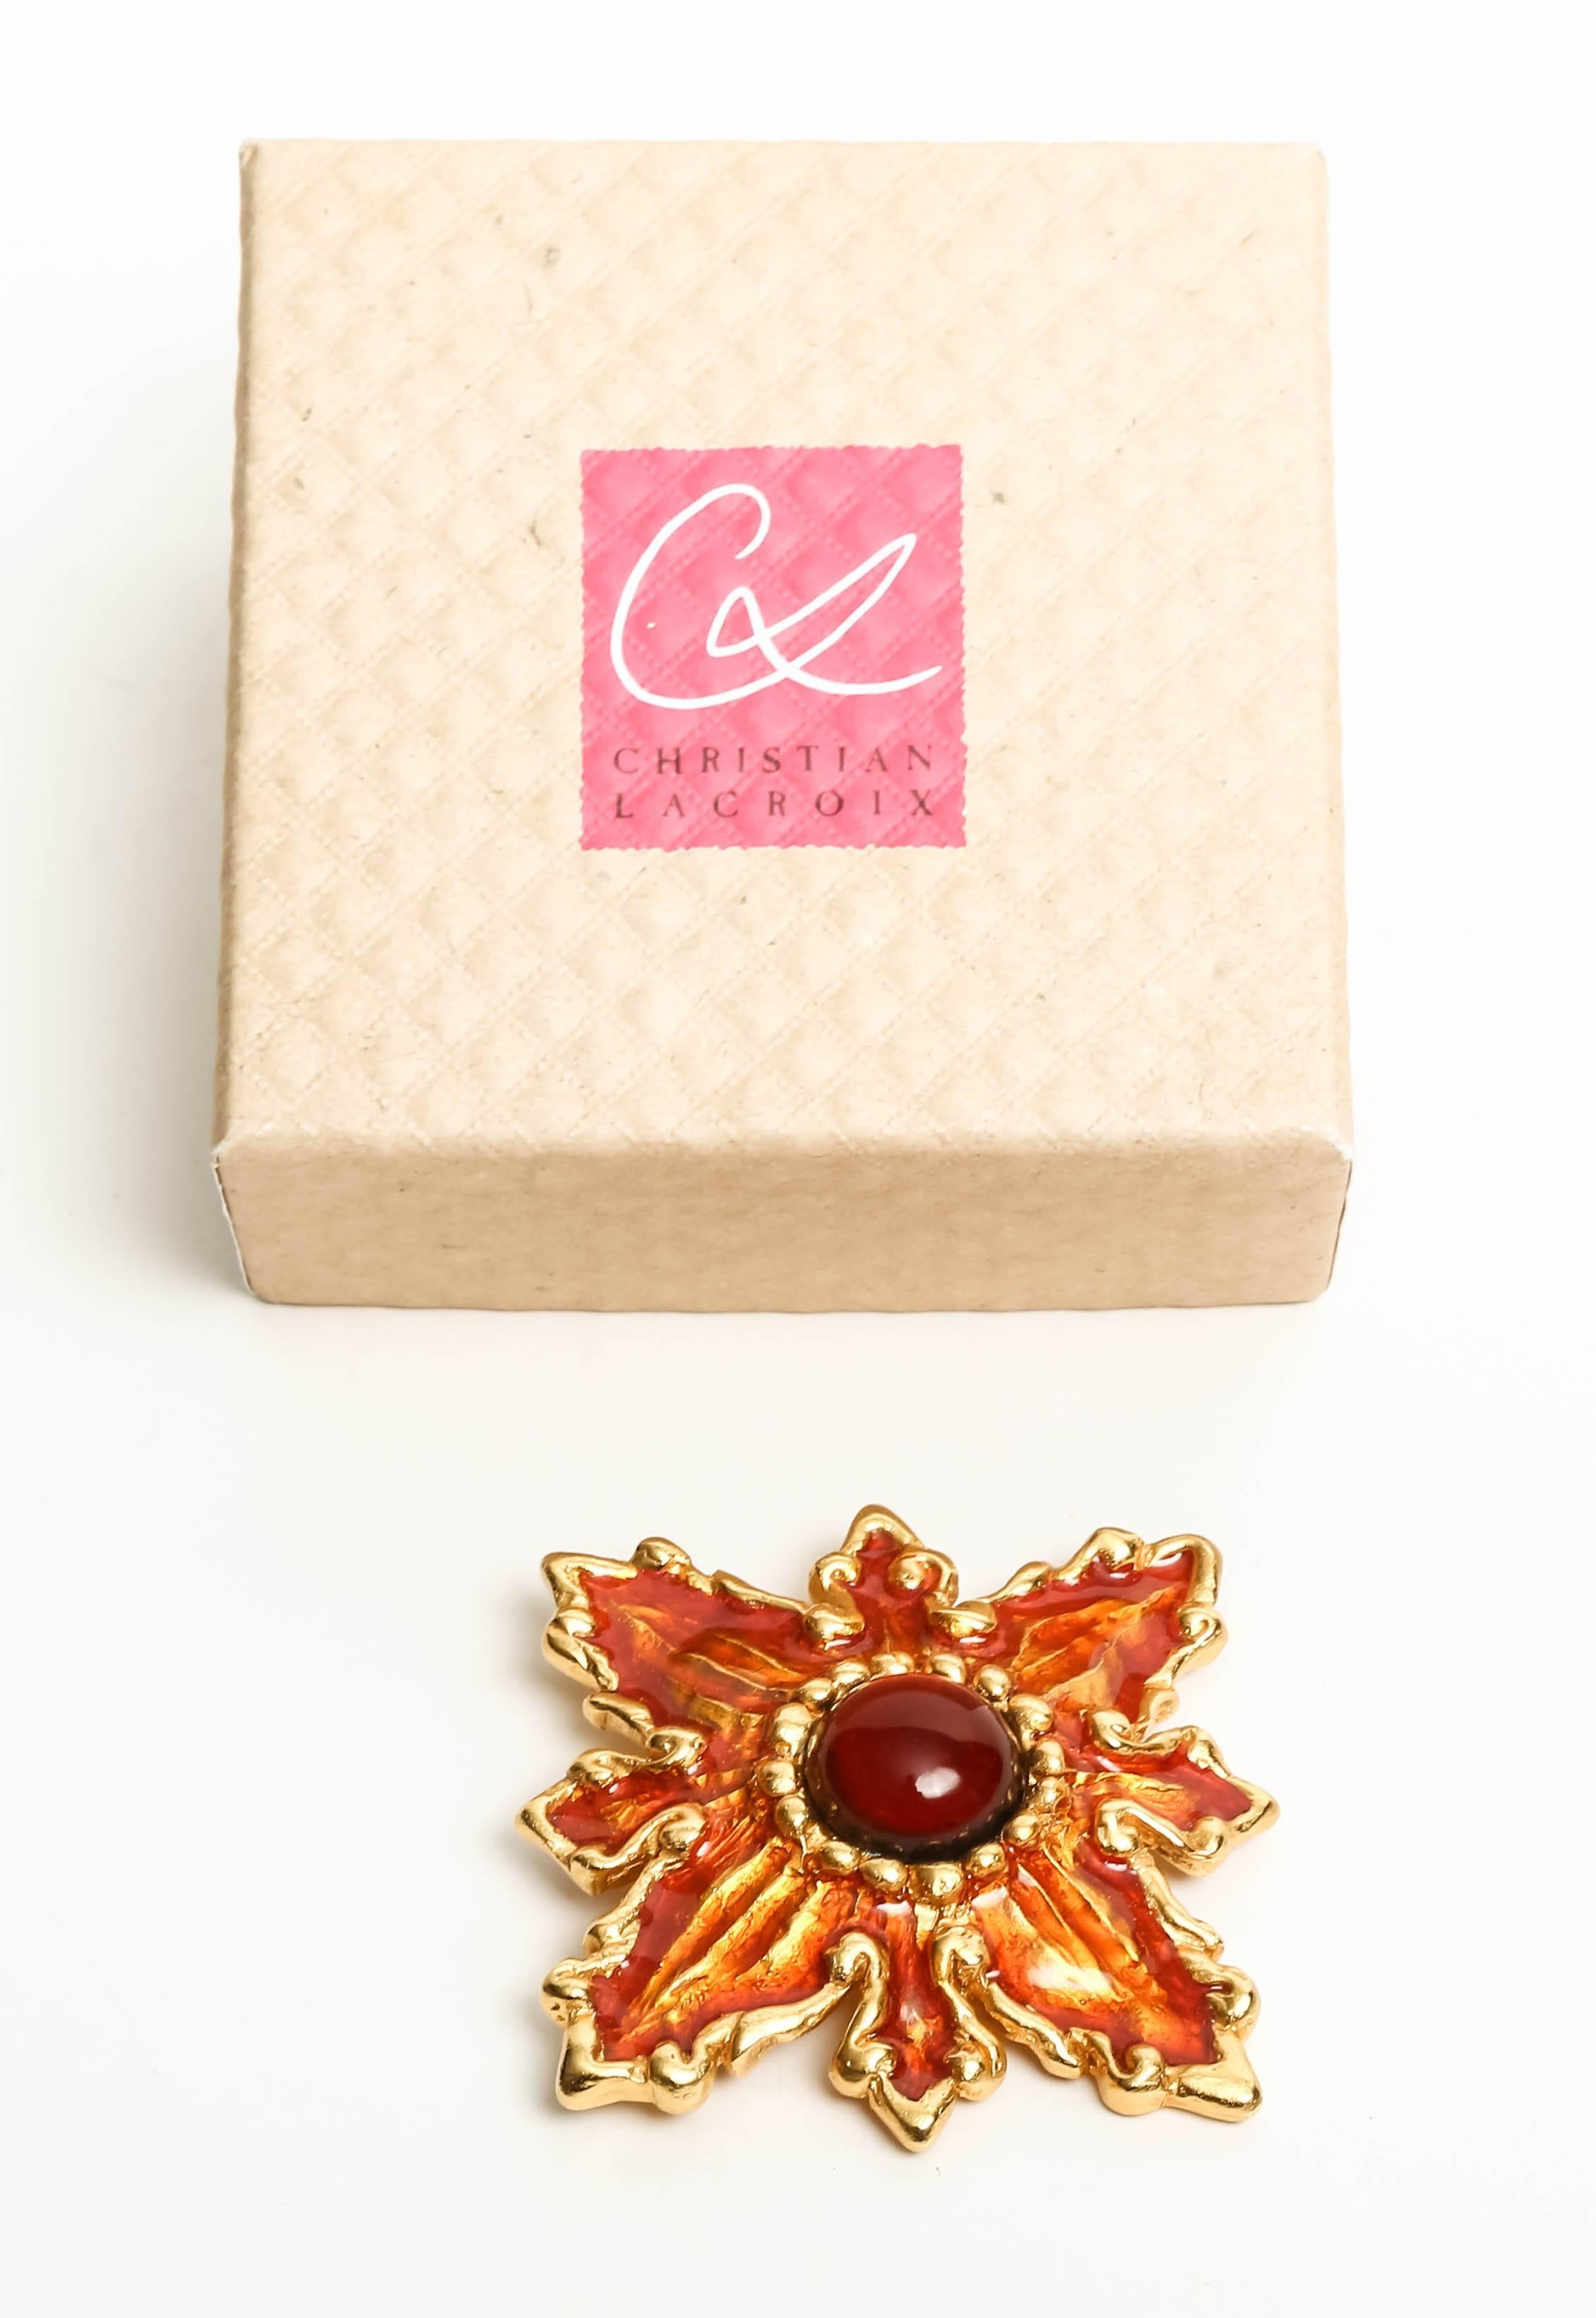 Vintage Christian Lacroix Pin In New Condition For Sale In Westhampton Beach, NY